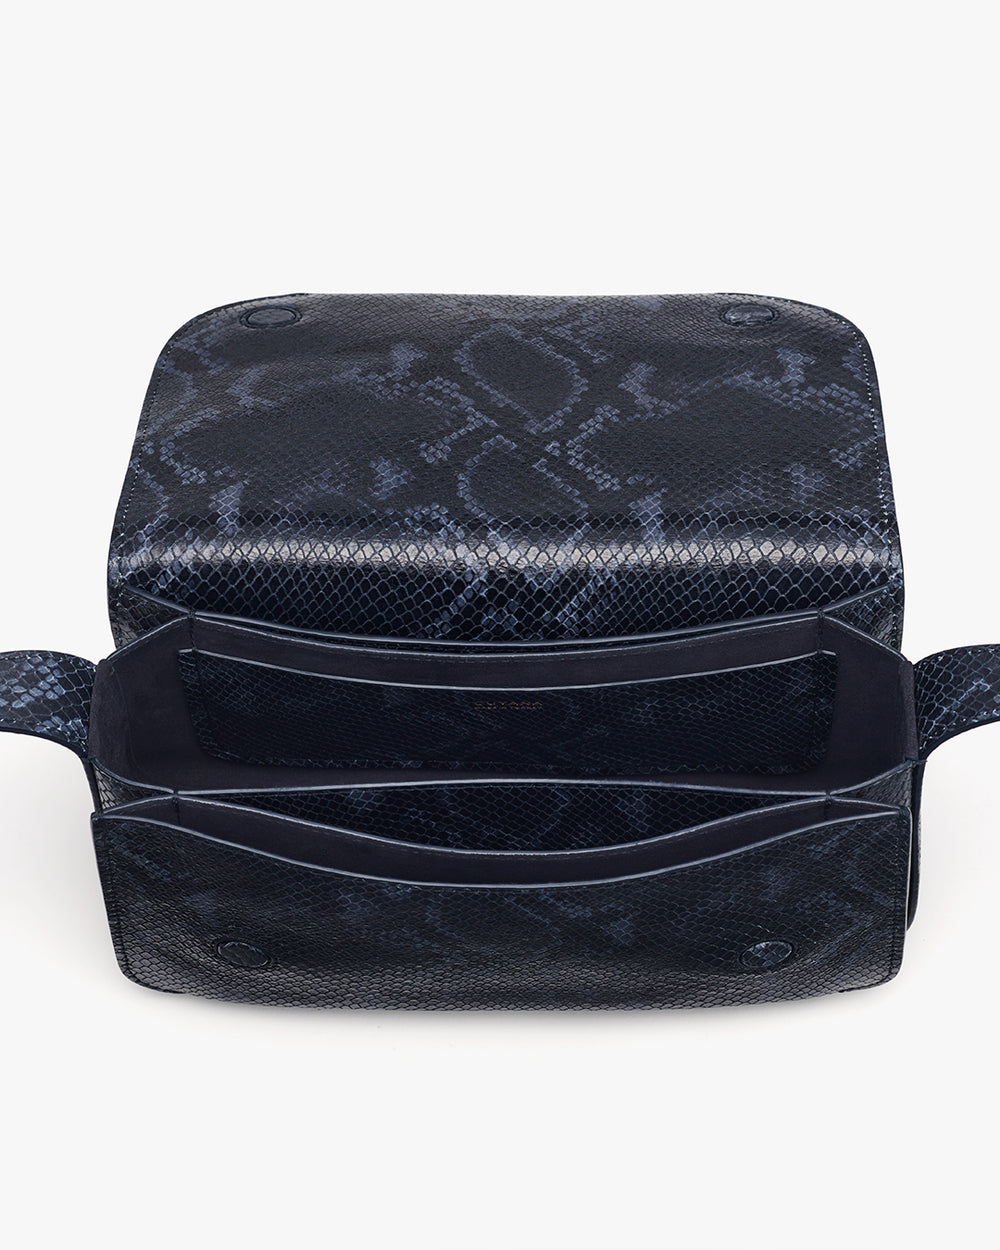 Patterned bag with a single handle and front pockets